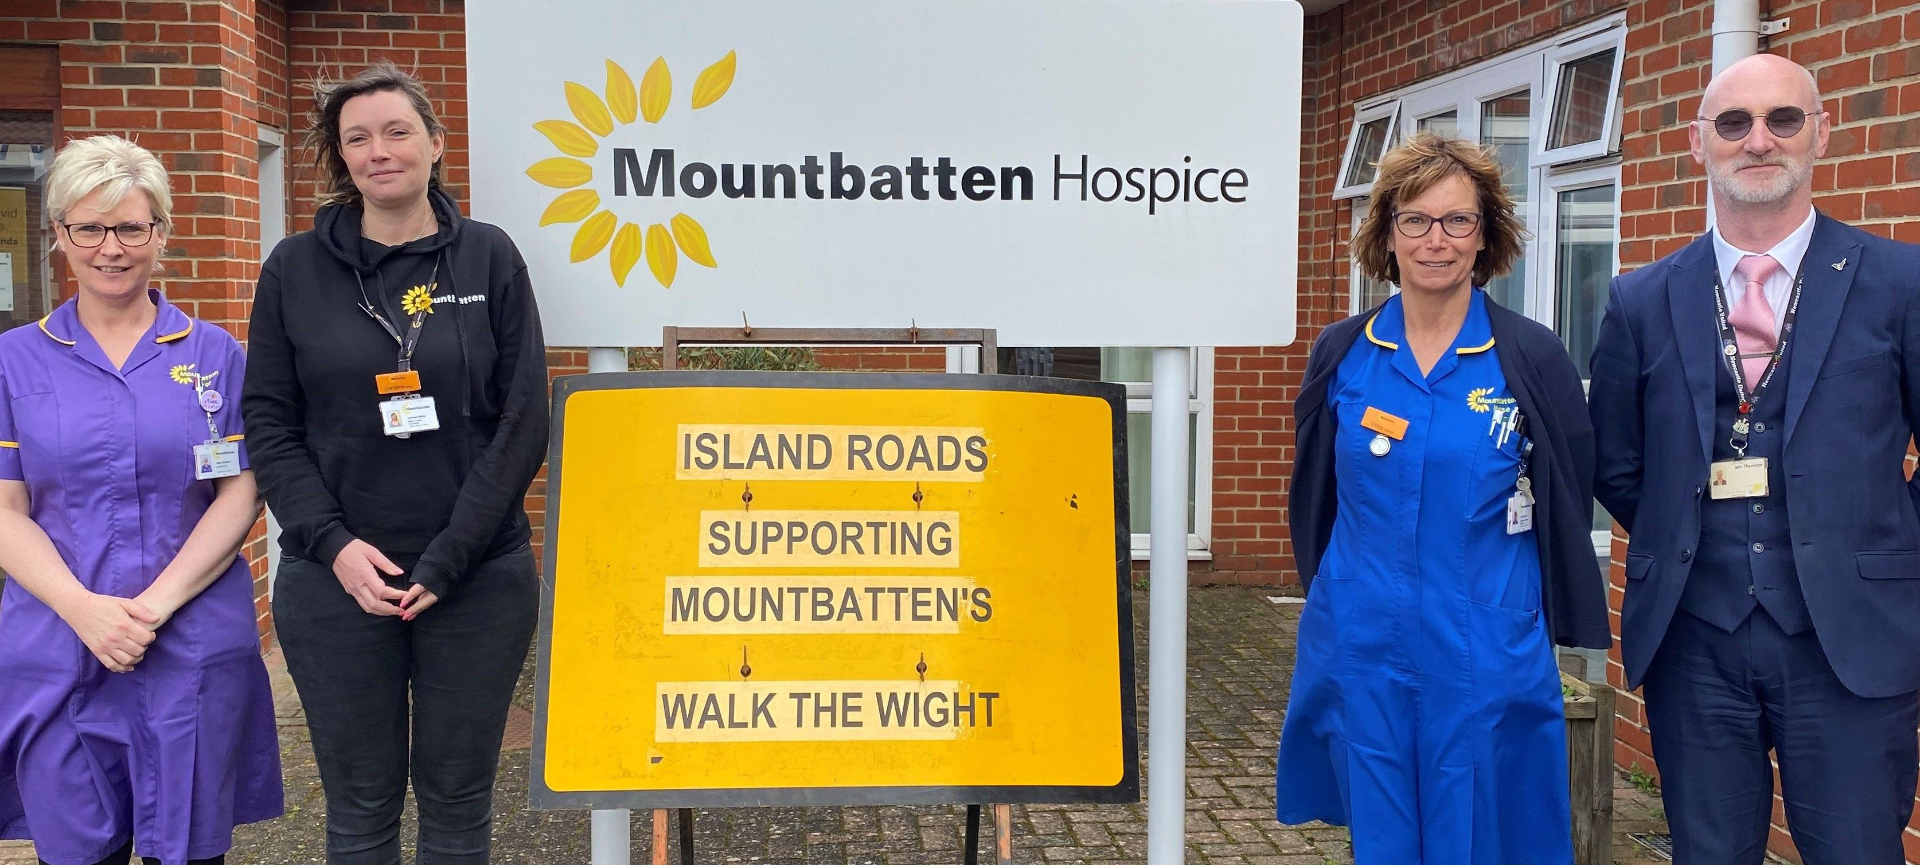 Nikki Guildford, Mountbatten healthcare assistant; Lorraine White, Mountbatten IW fundraising manager; ; Vicky Scovell, senior staff nurse; Iain Thornton, Island Roads streetworks manager